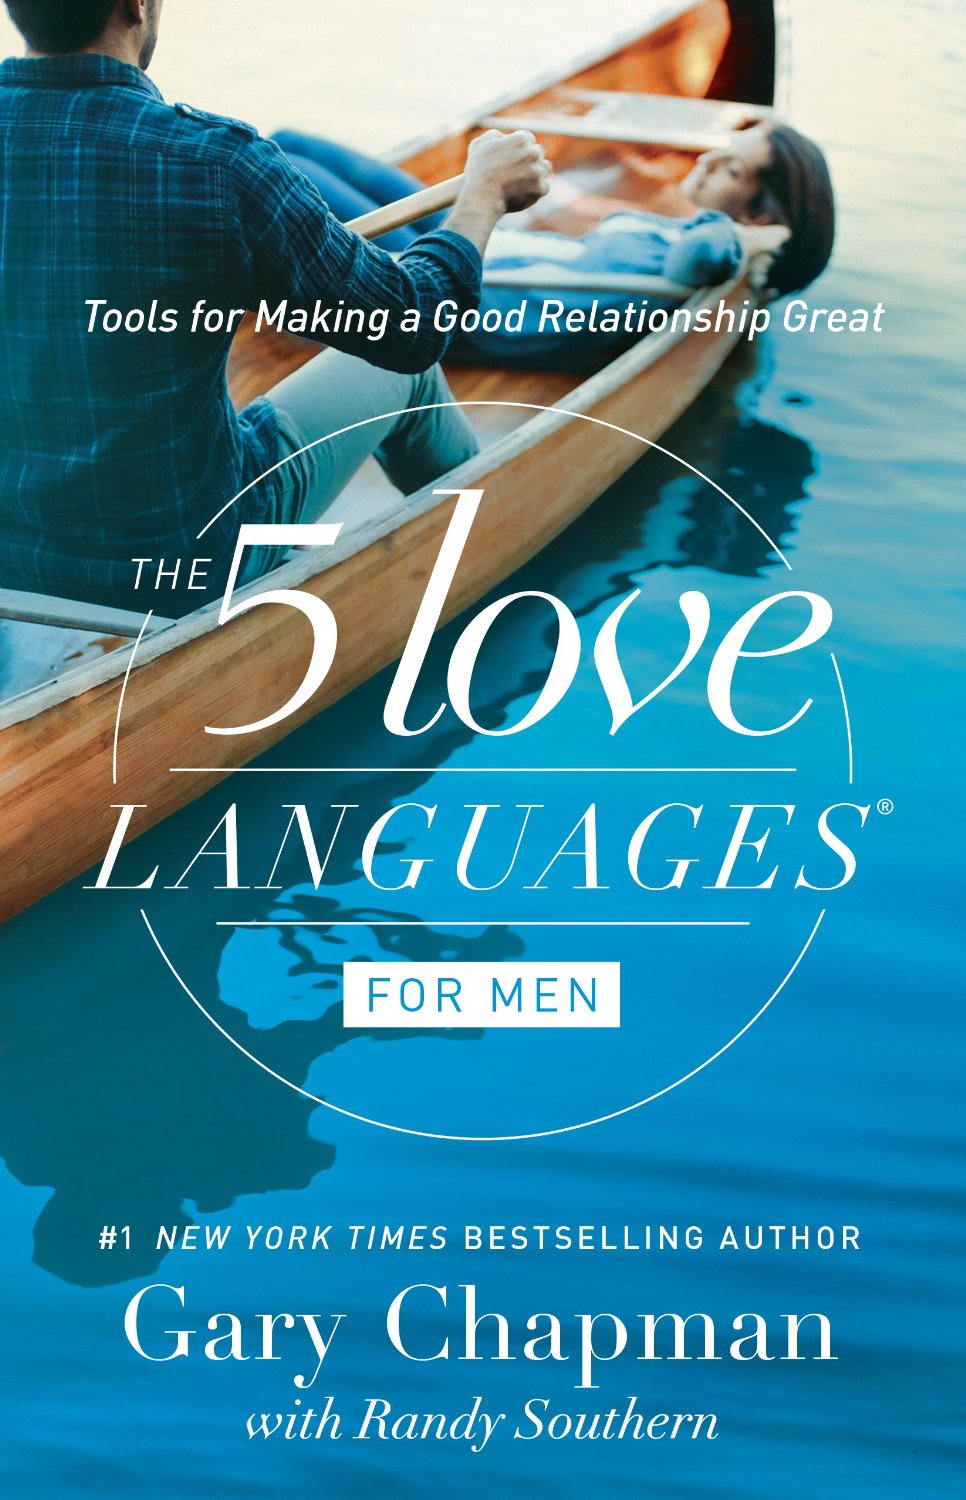 book-review-the-five-love-languages-for-men-by-gary-chapman-and-randy-southern-julie-arduini